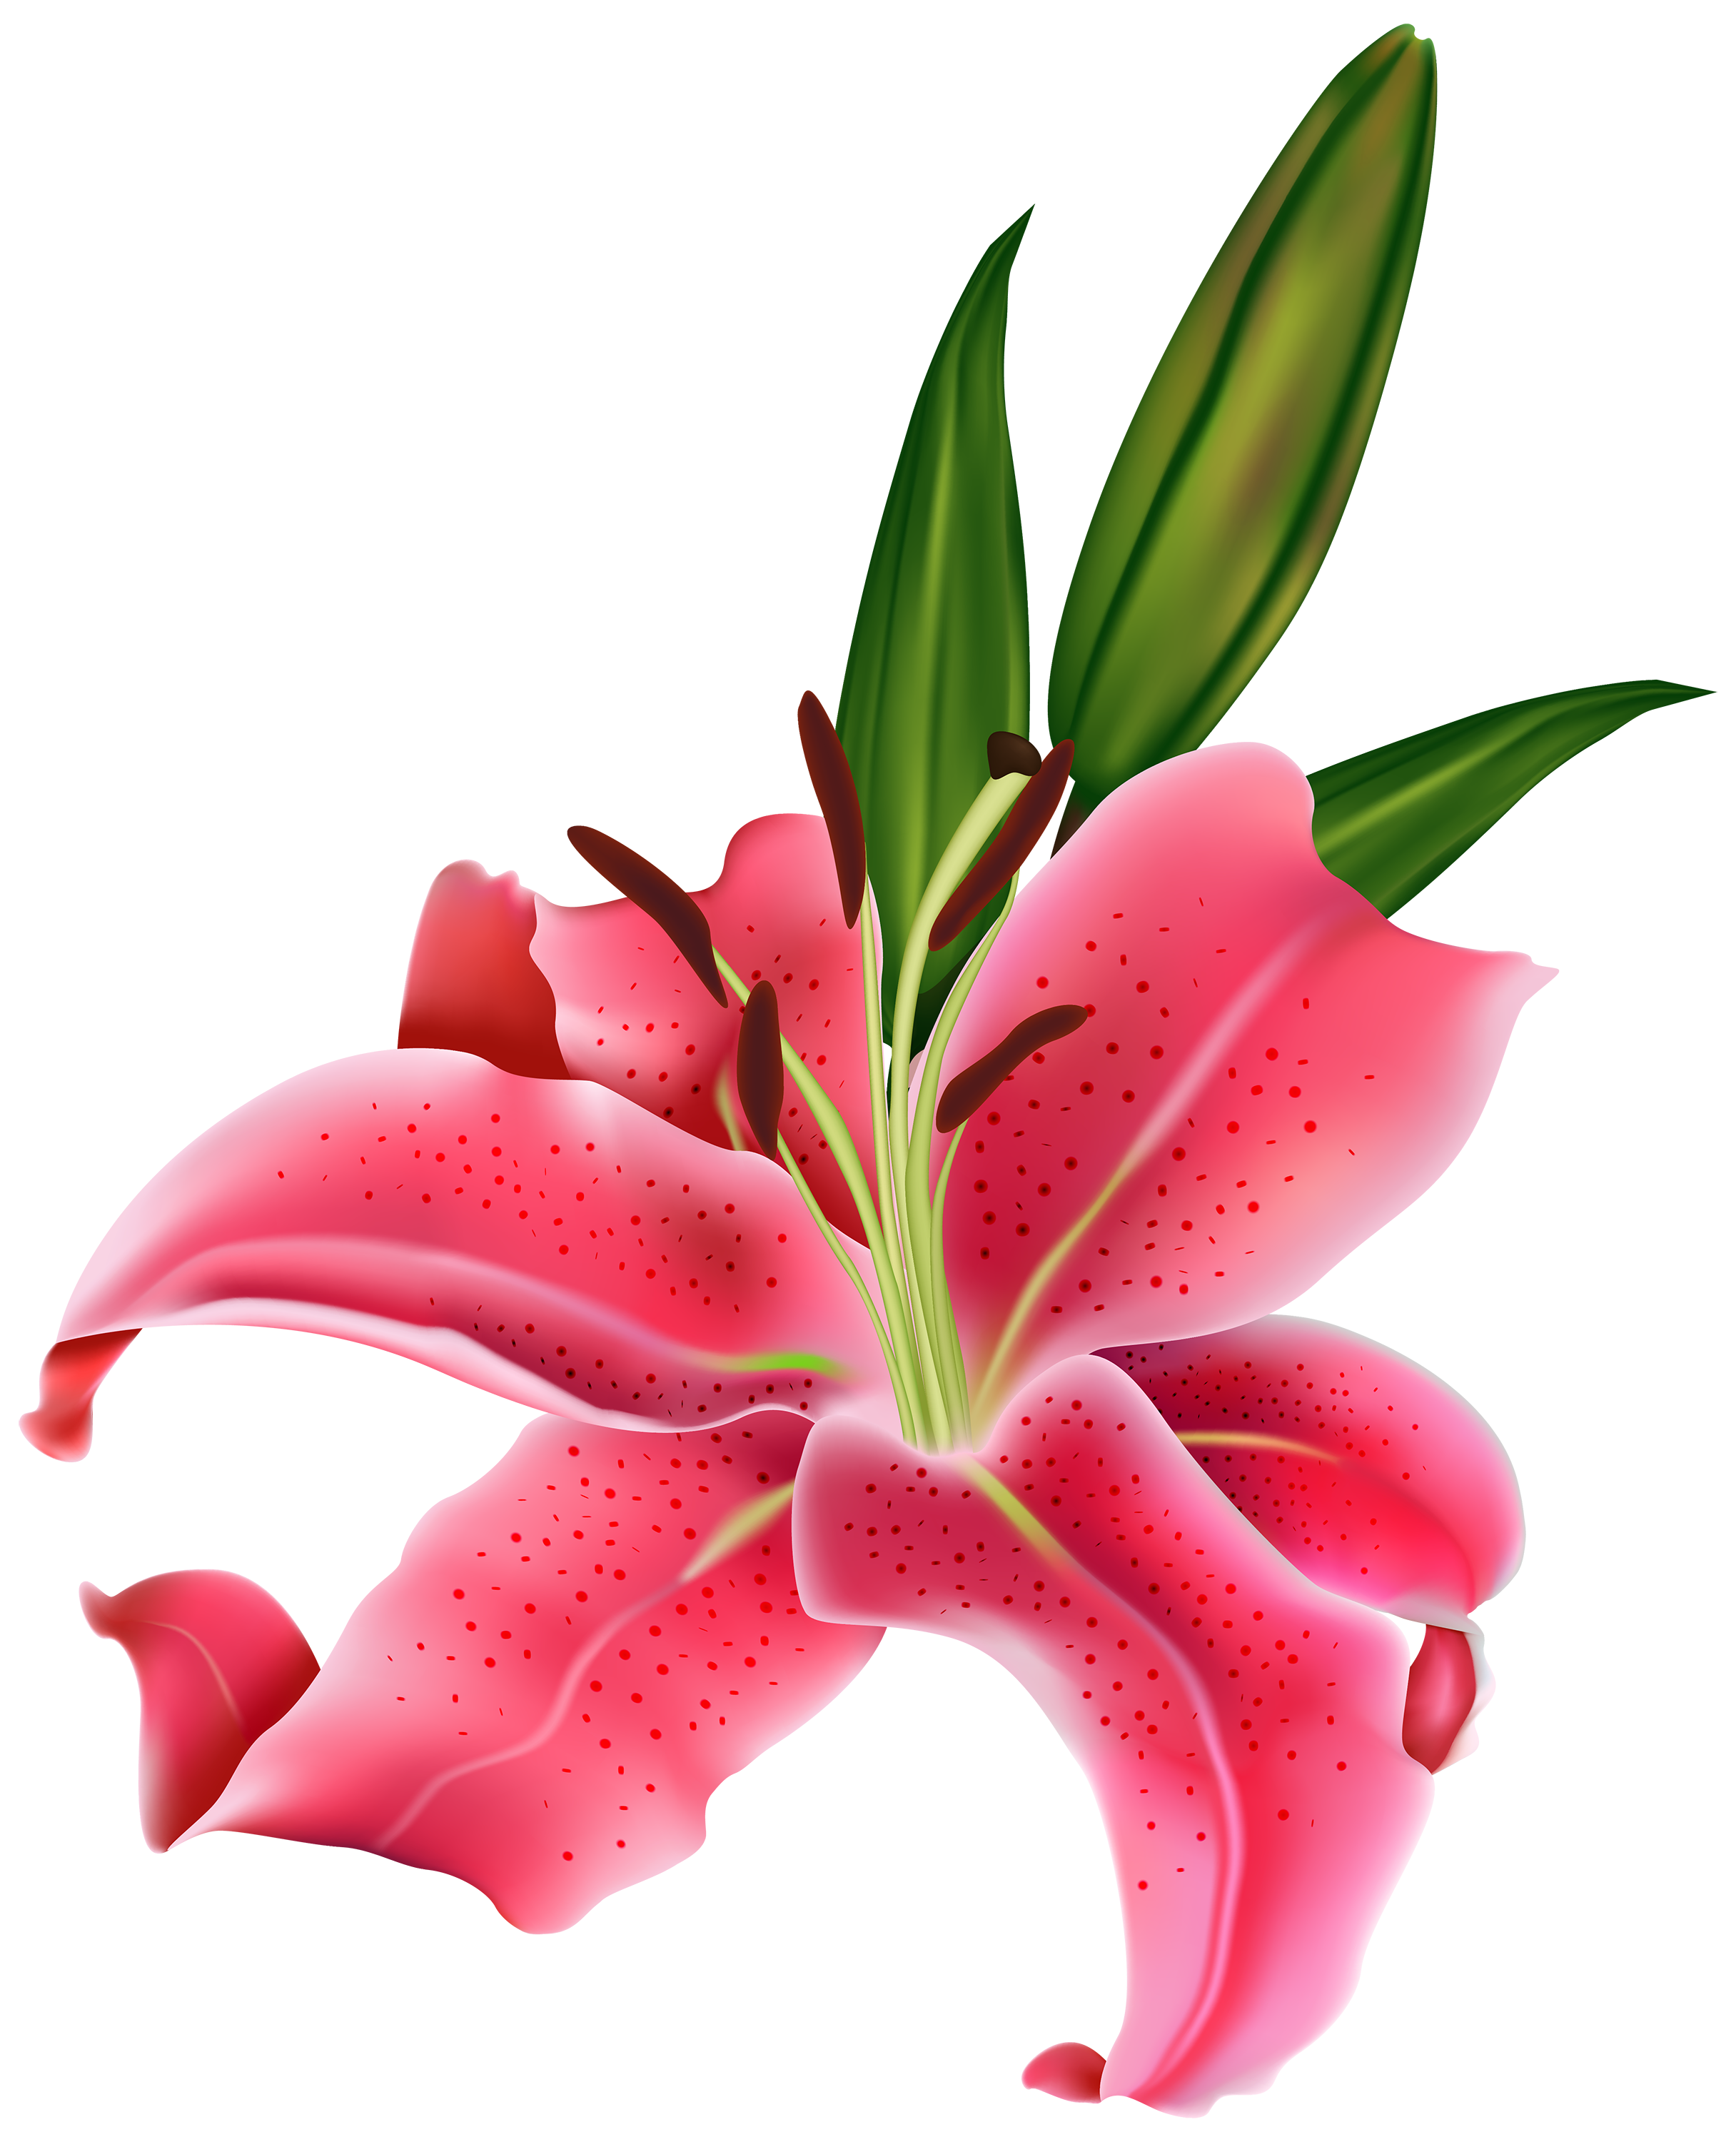 Lily Clip Art - Images, Illustrations, Photos